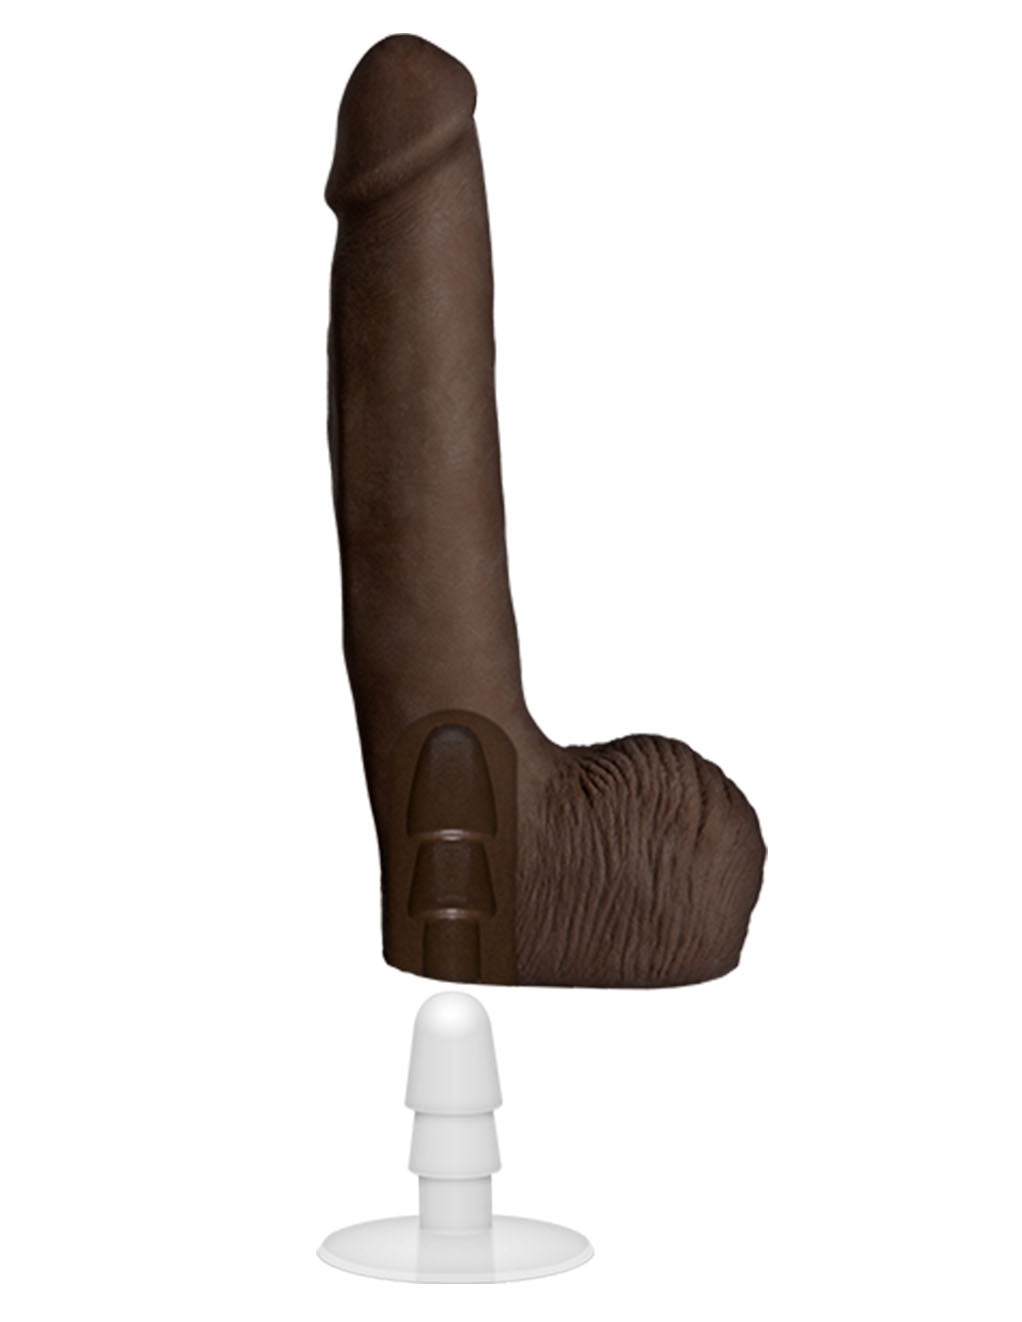 Signature Cocks Rob Piper 10.5 Inch UltraSkyn Cock- Suction Cup